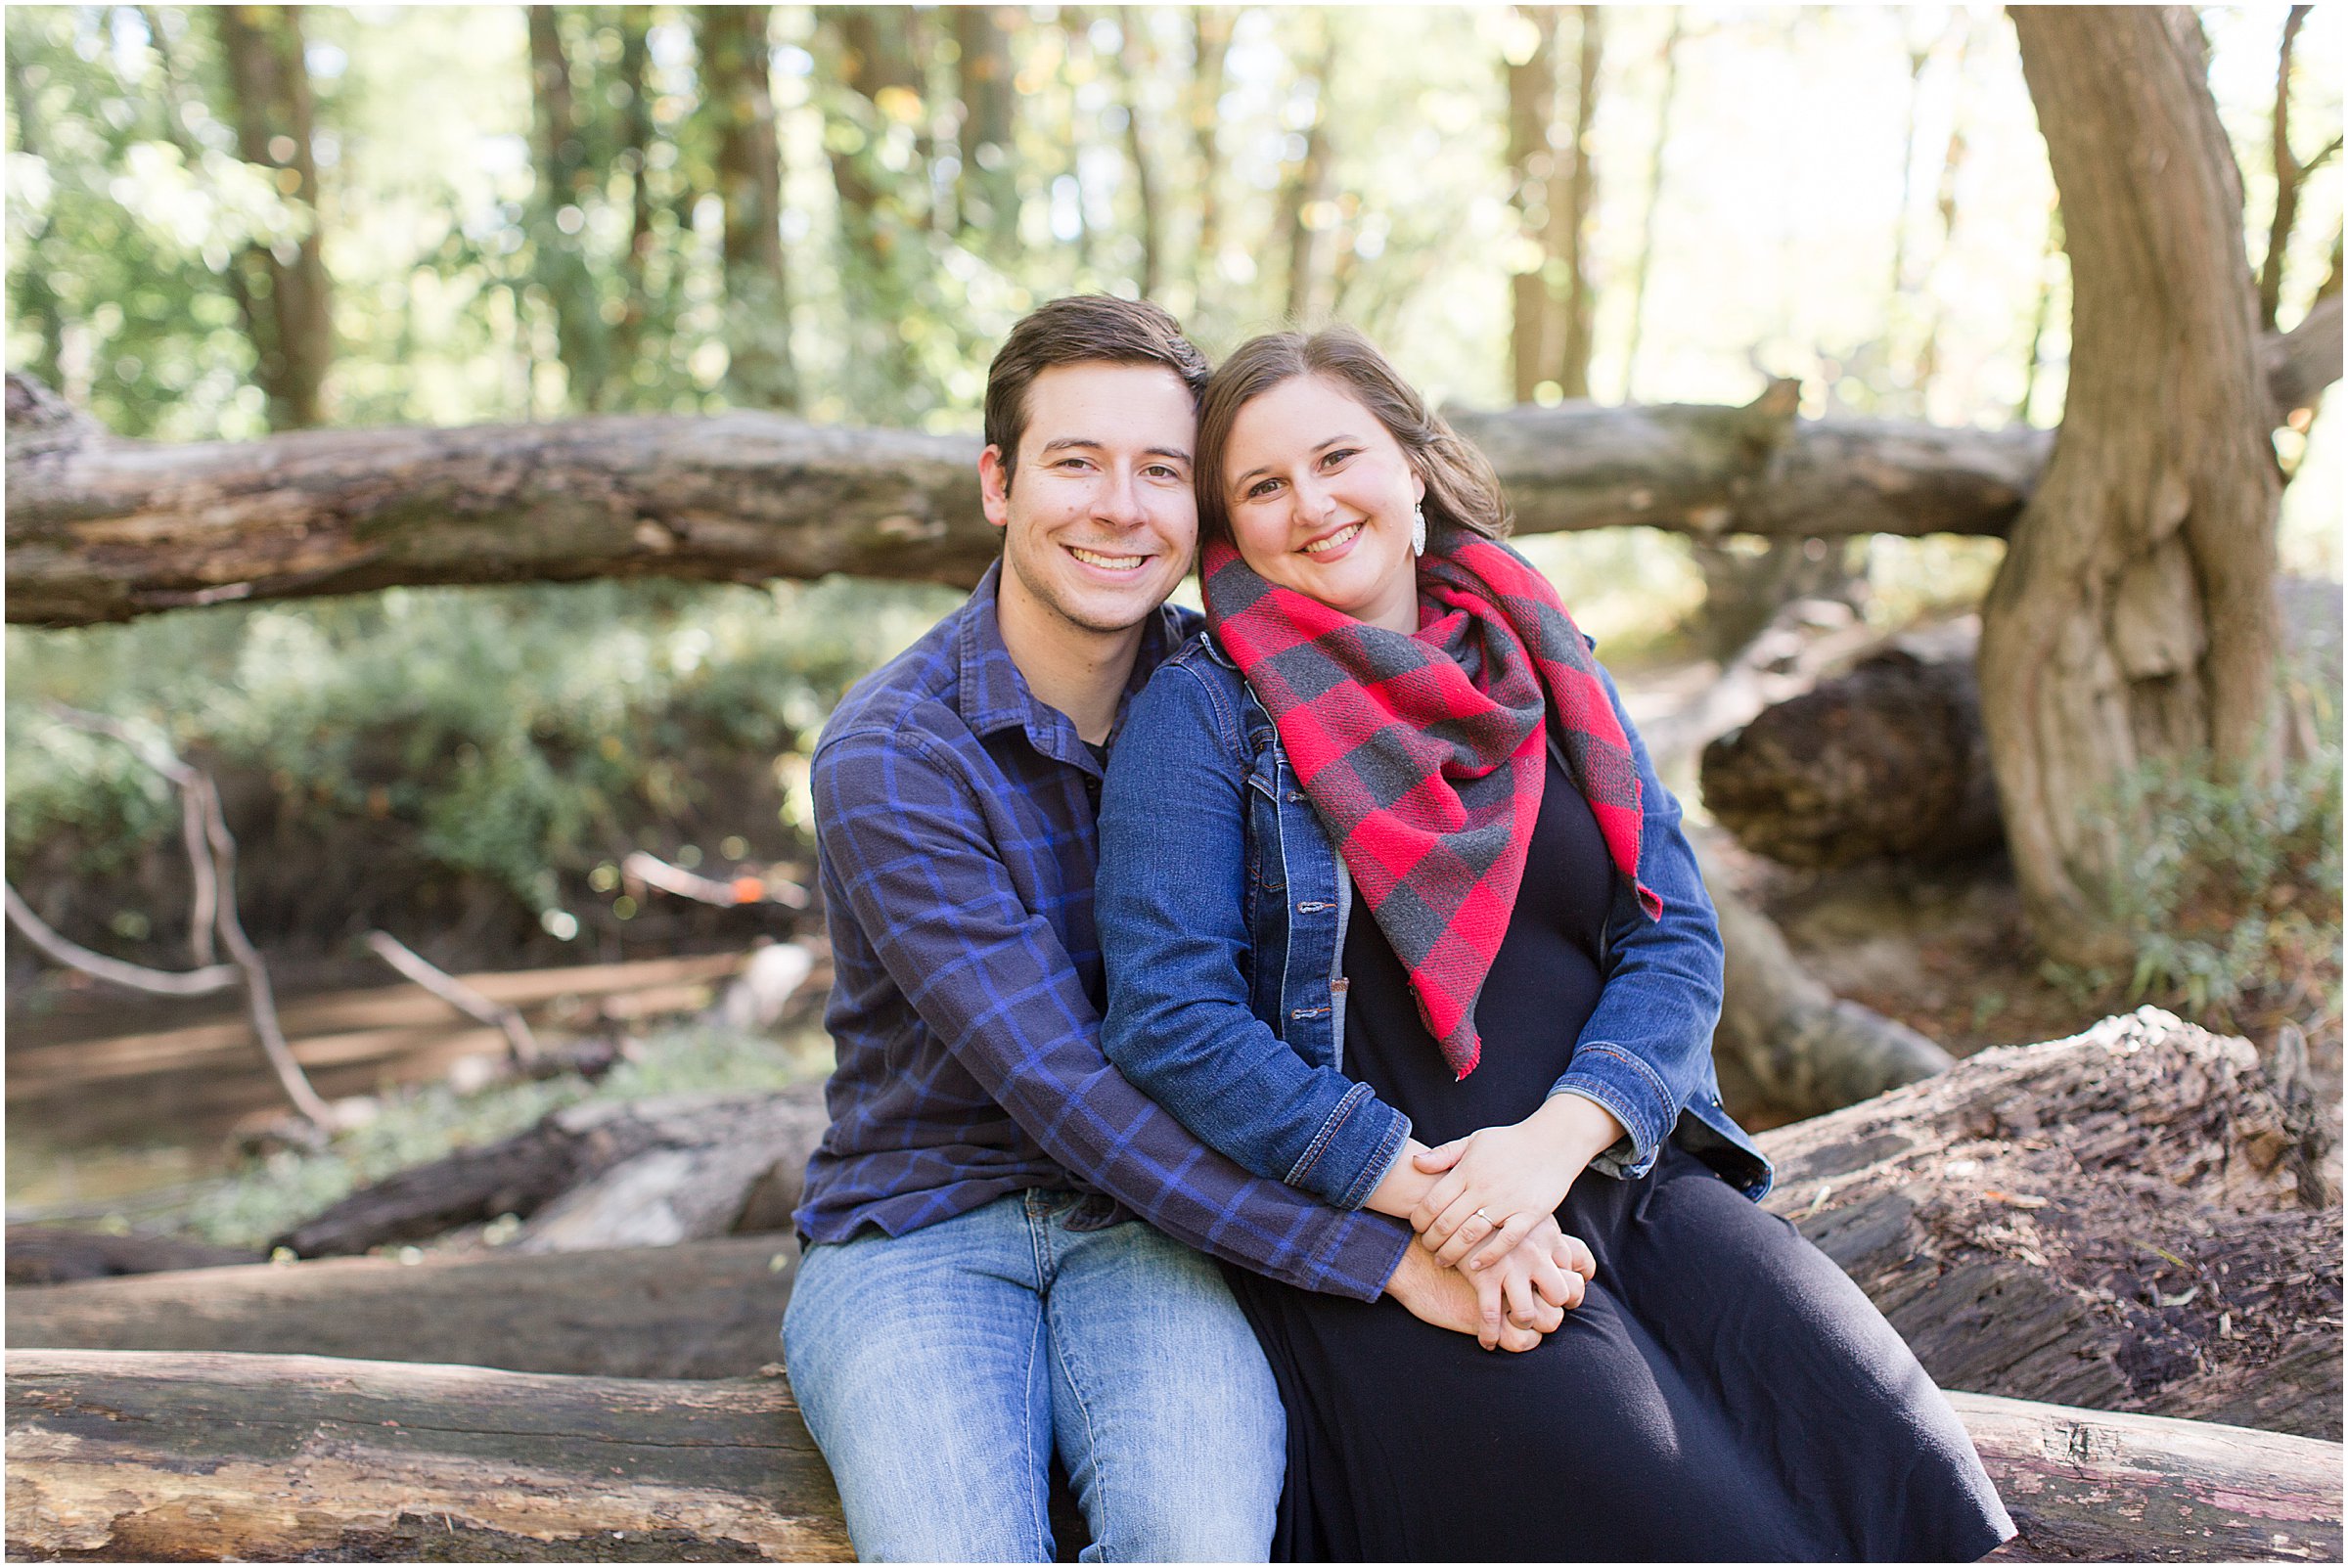 Holliday Park Engagement Session by Sami Renee_0017.jpg